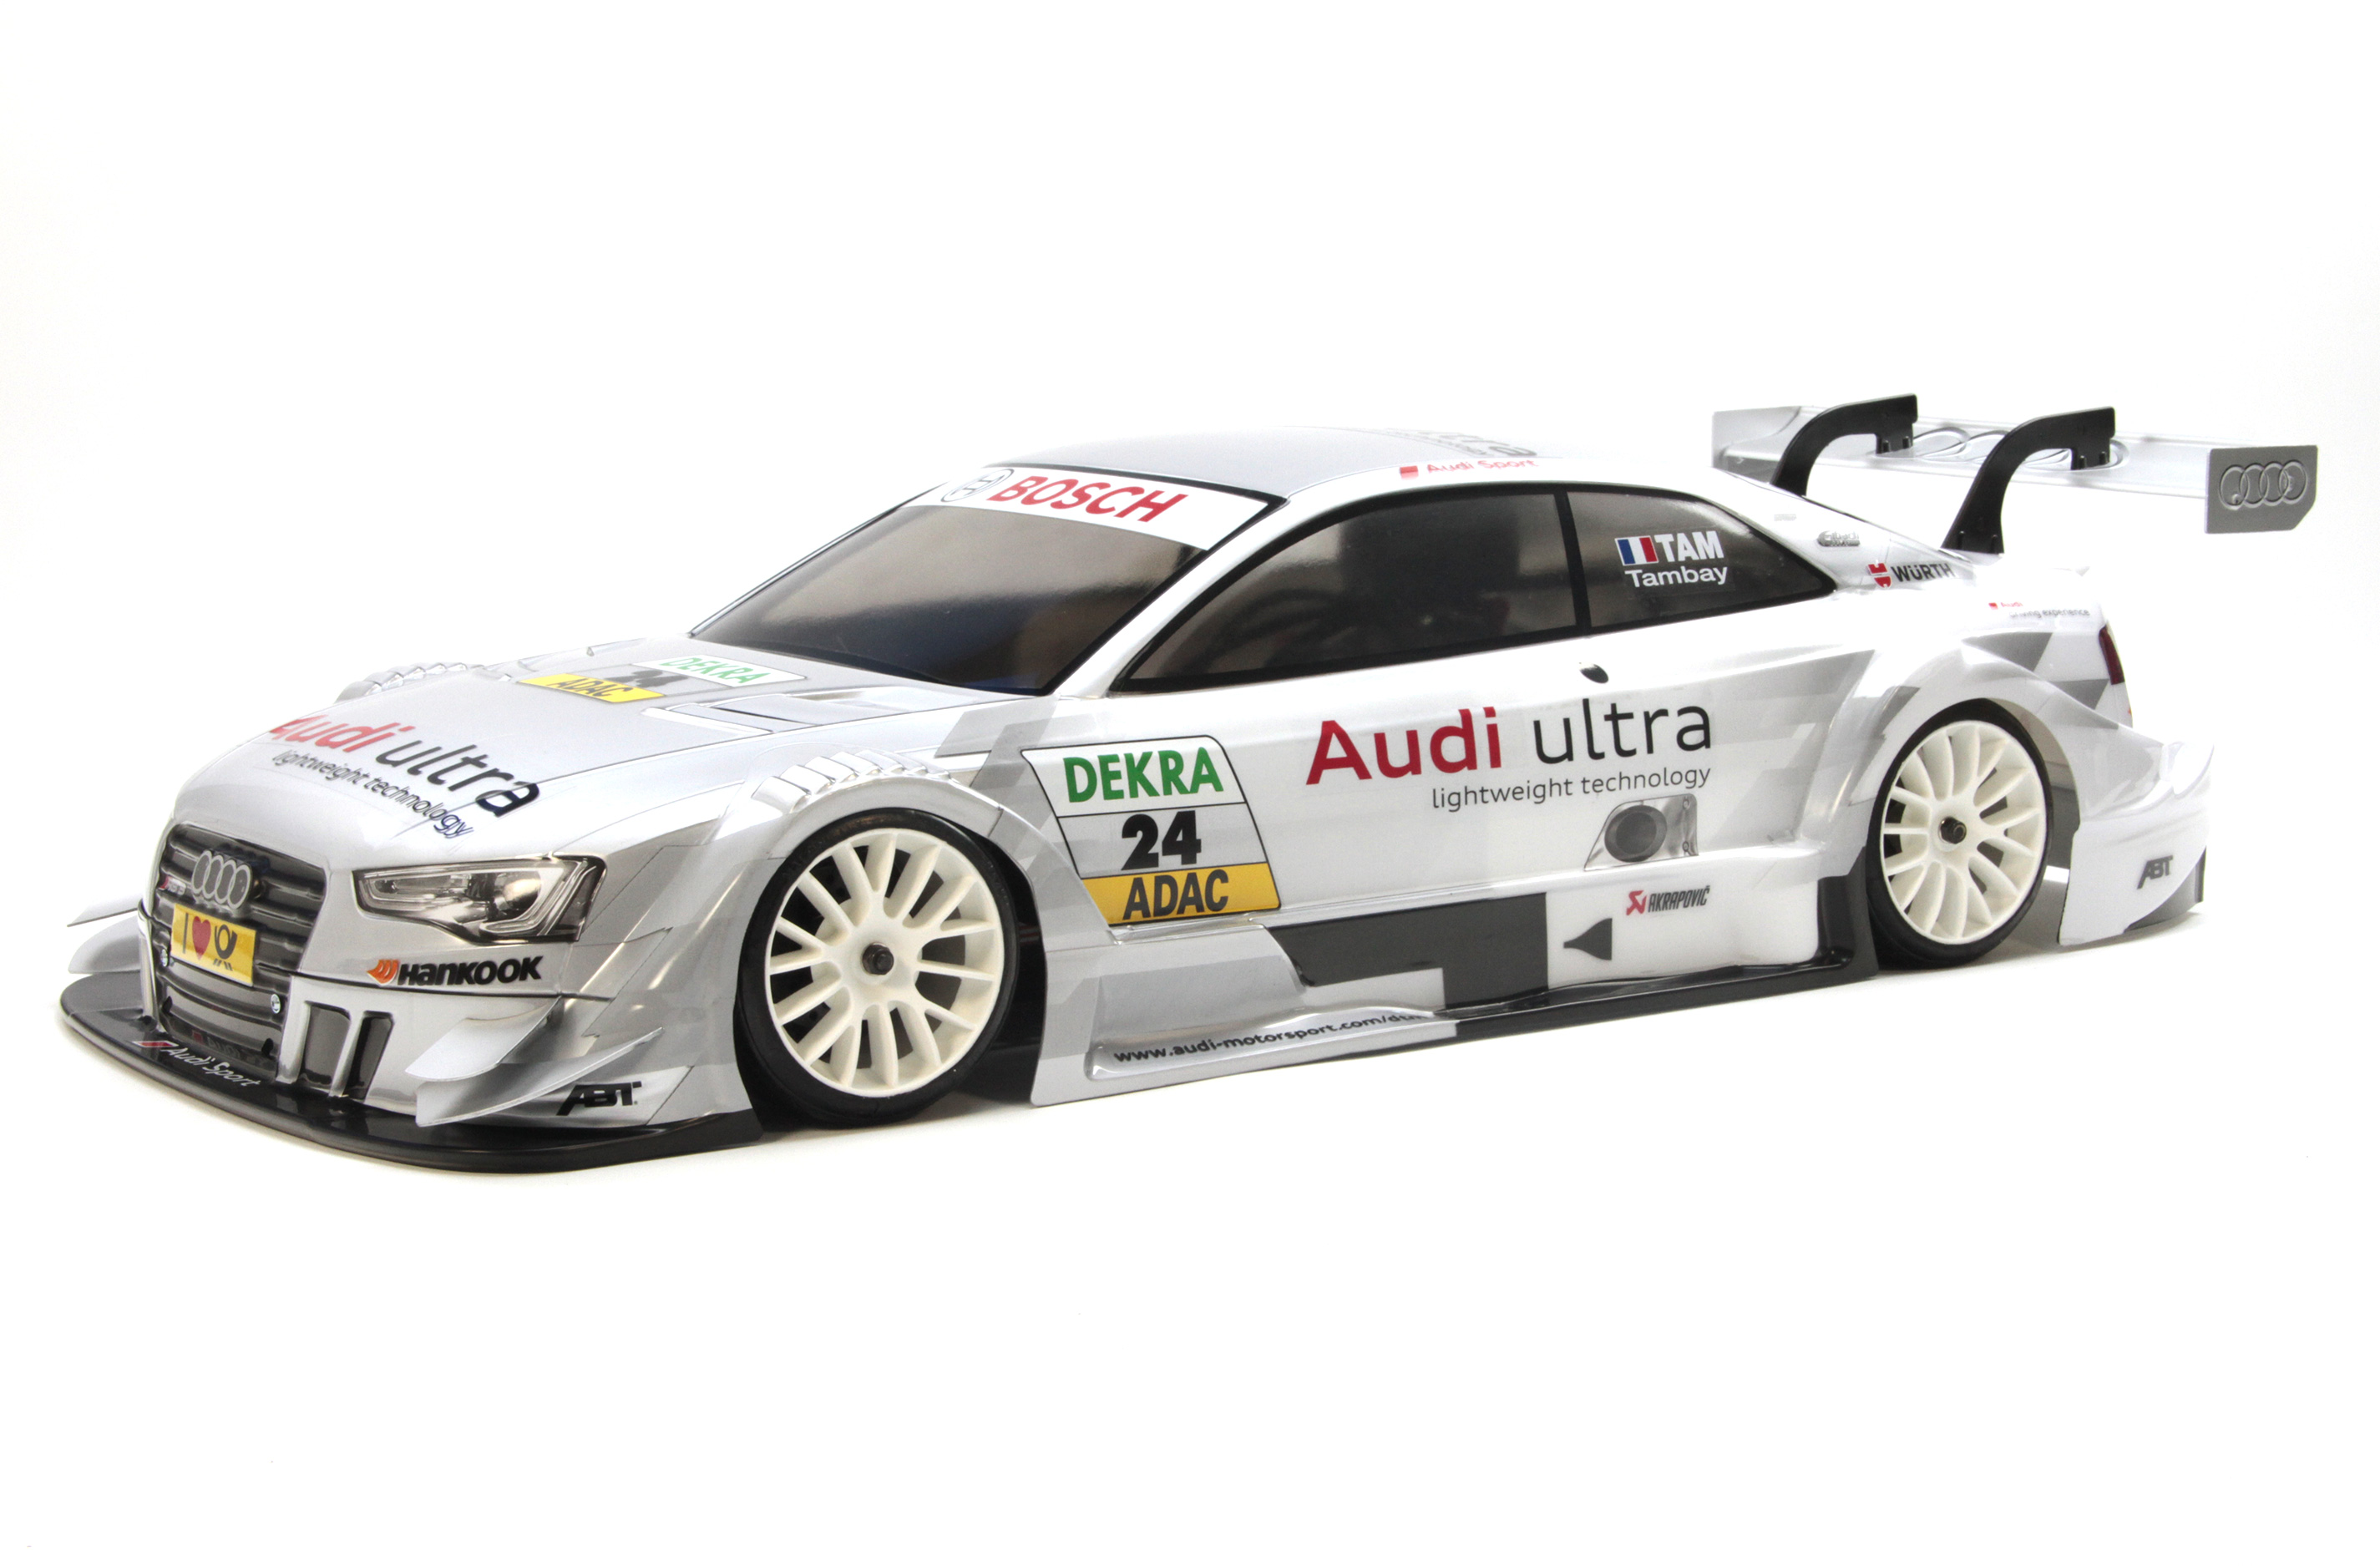 y1441/06 Audi RS5 DTM body shell, painted, Team Audi-Ultra paint theme